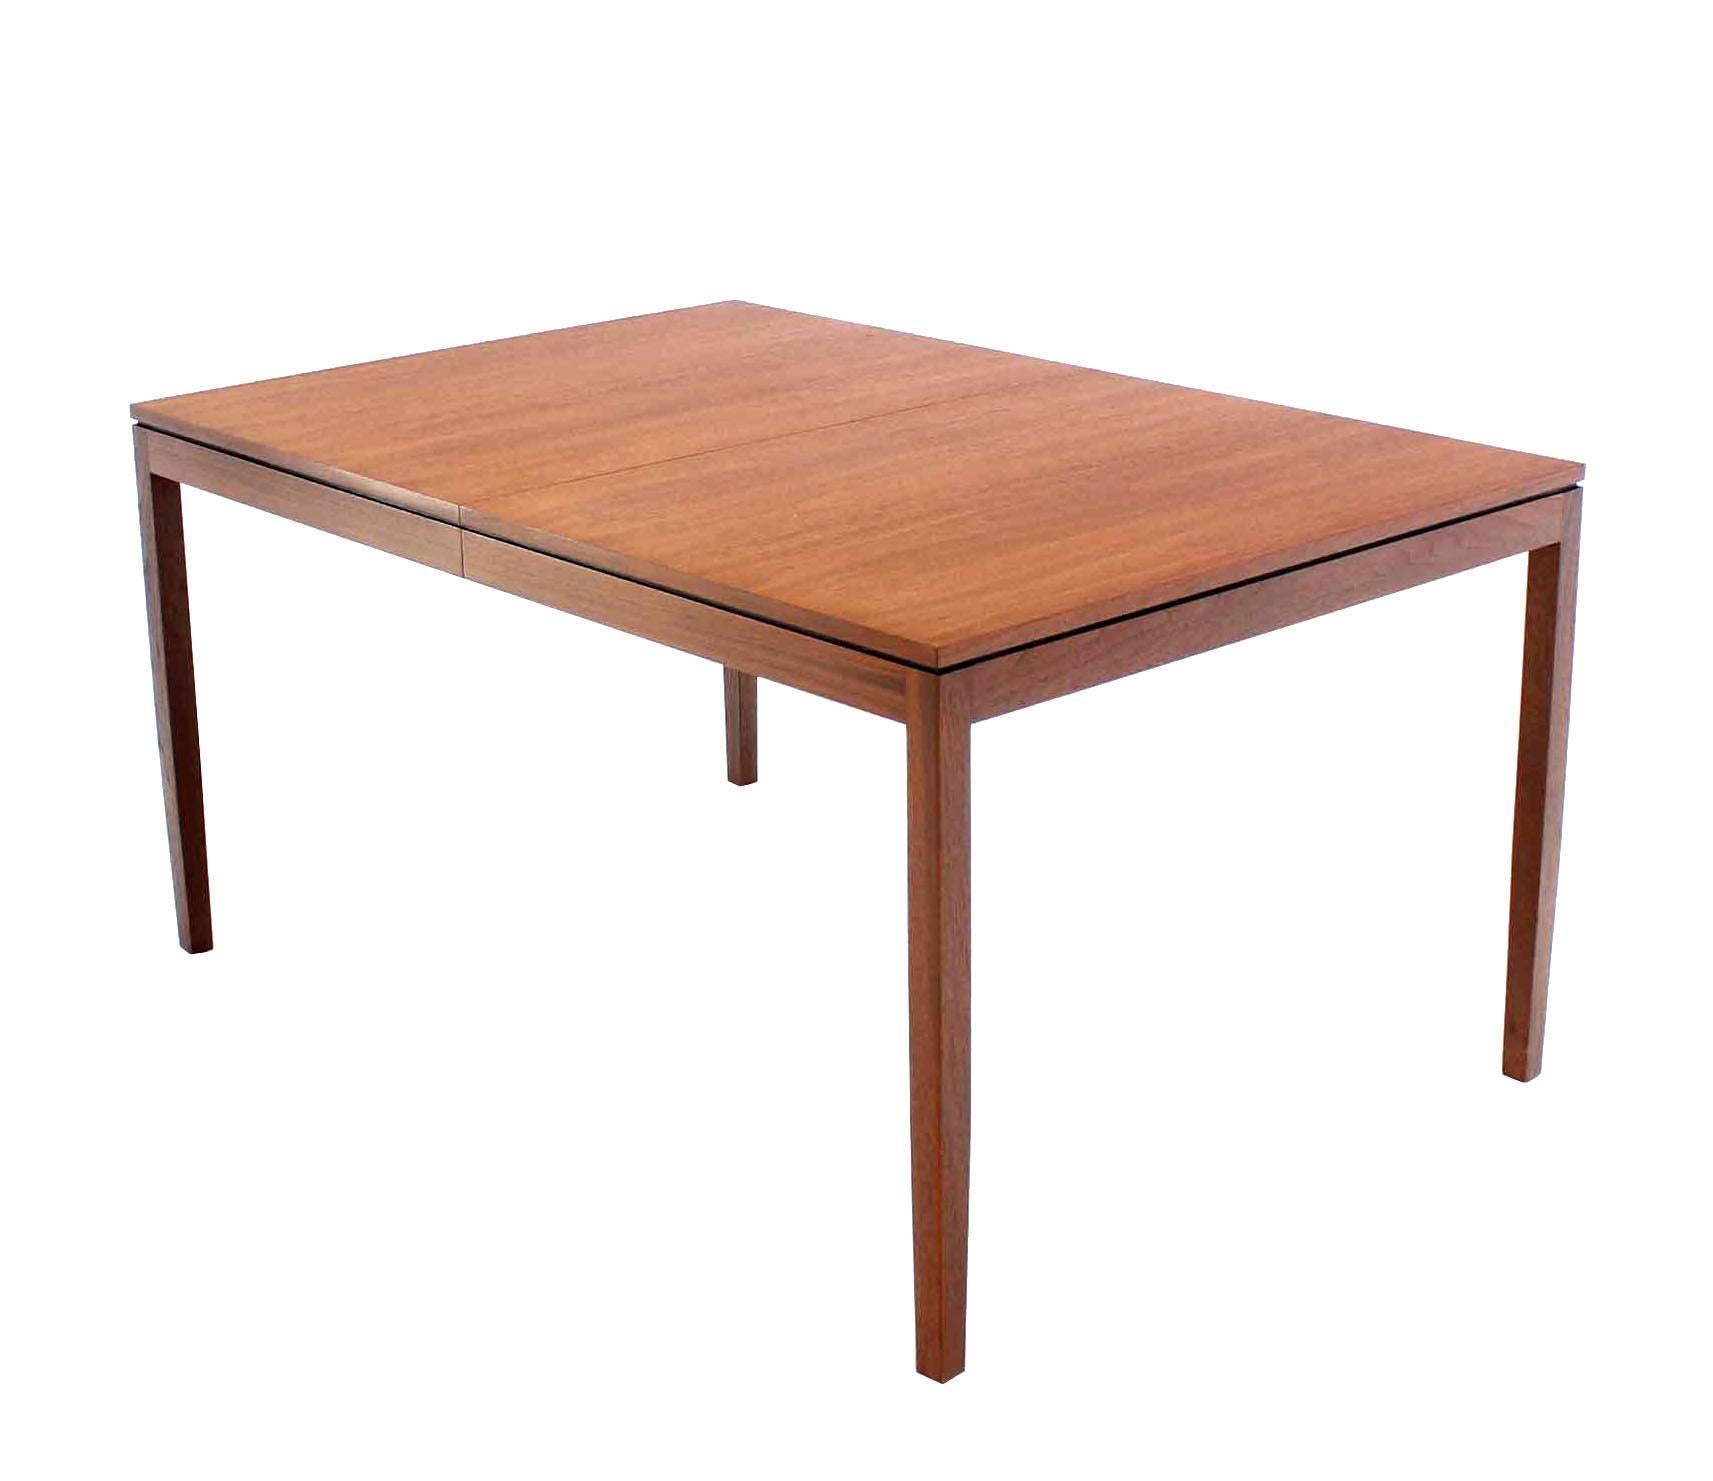 20th Century Outstanding Quality Walnut Dining Room Table by Knoll